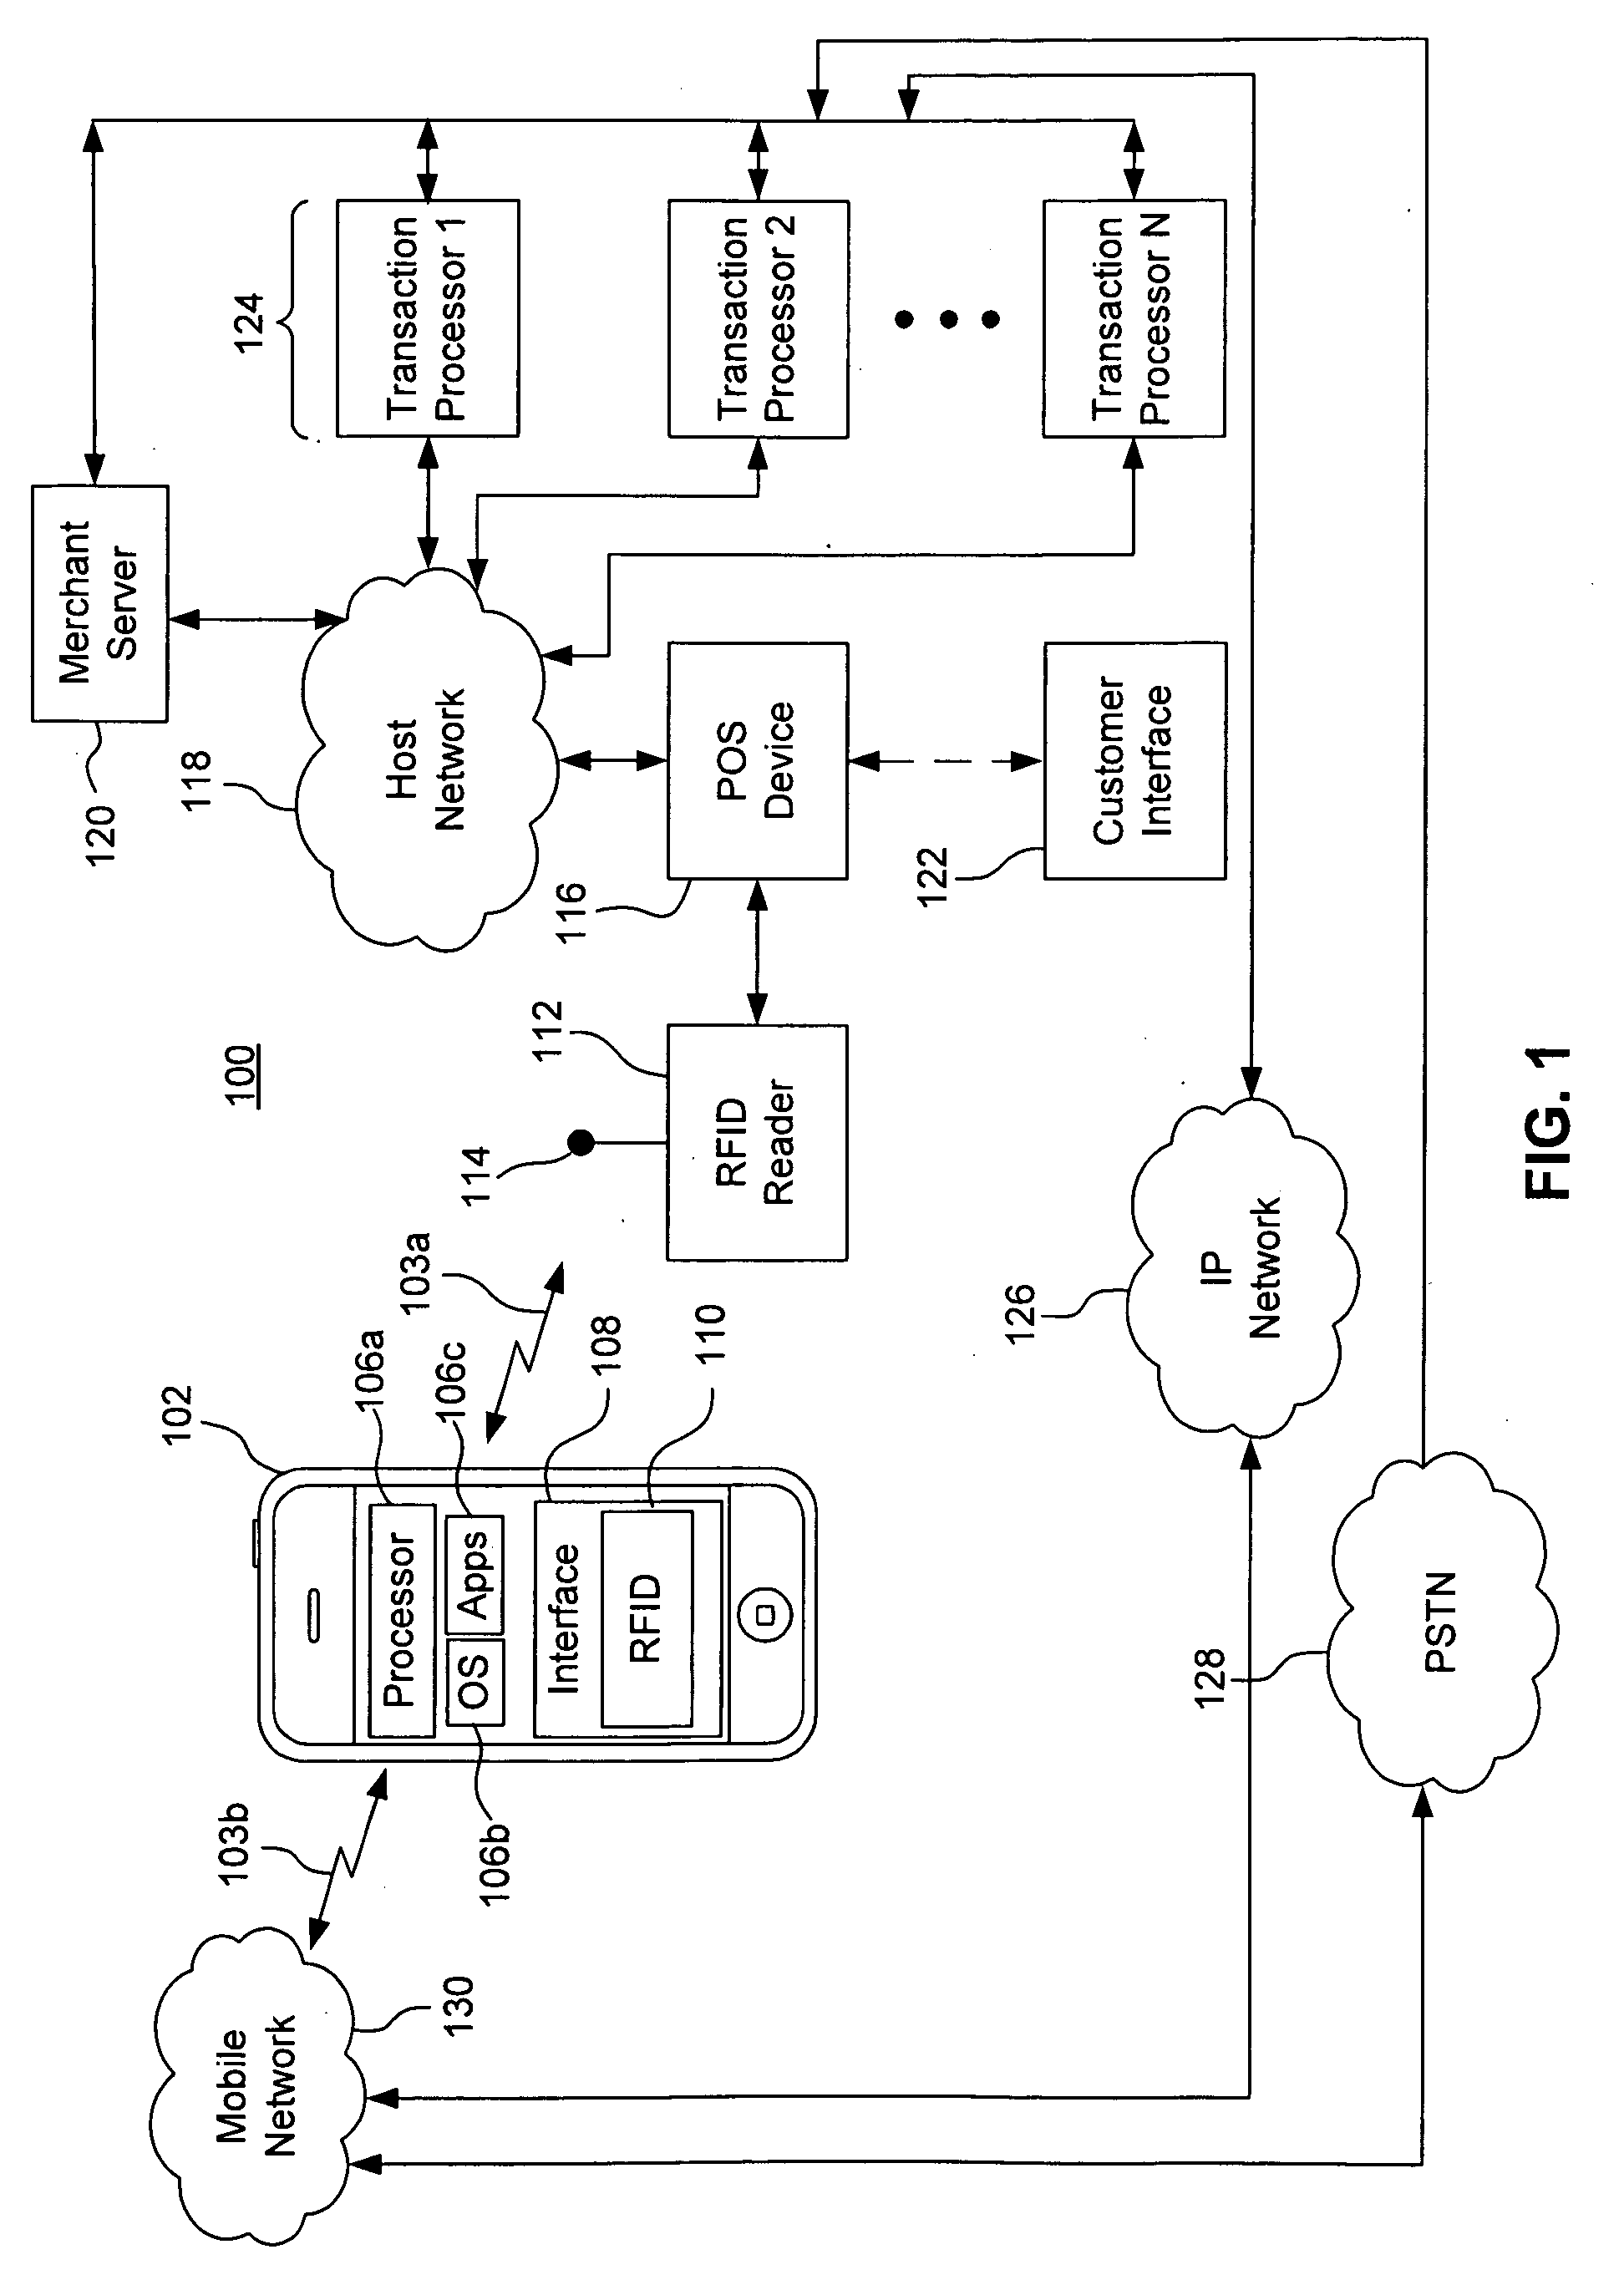 System, method, apparatus and computer program product for interfacing a multi-card radio frequency (RF) device with a mobile communications device